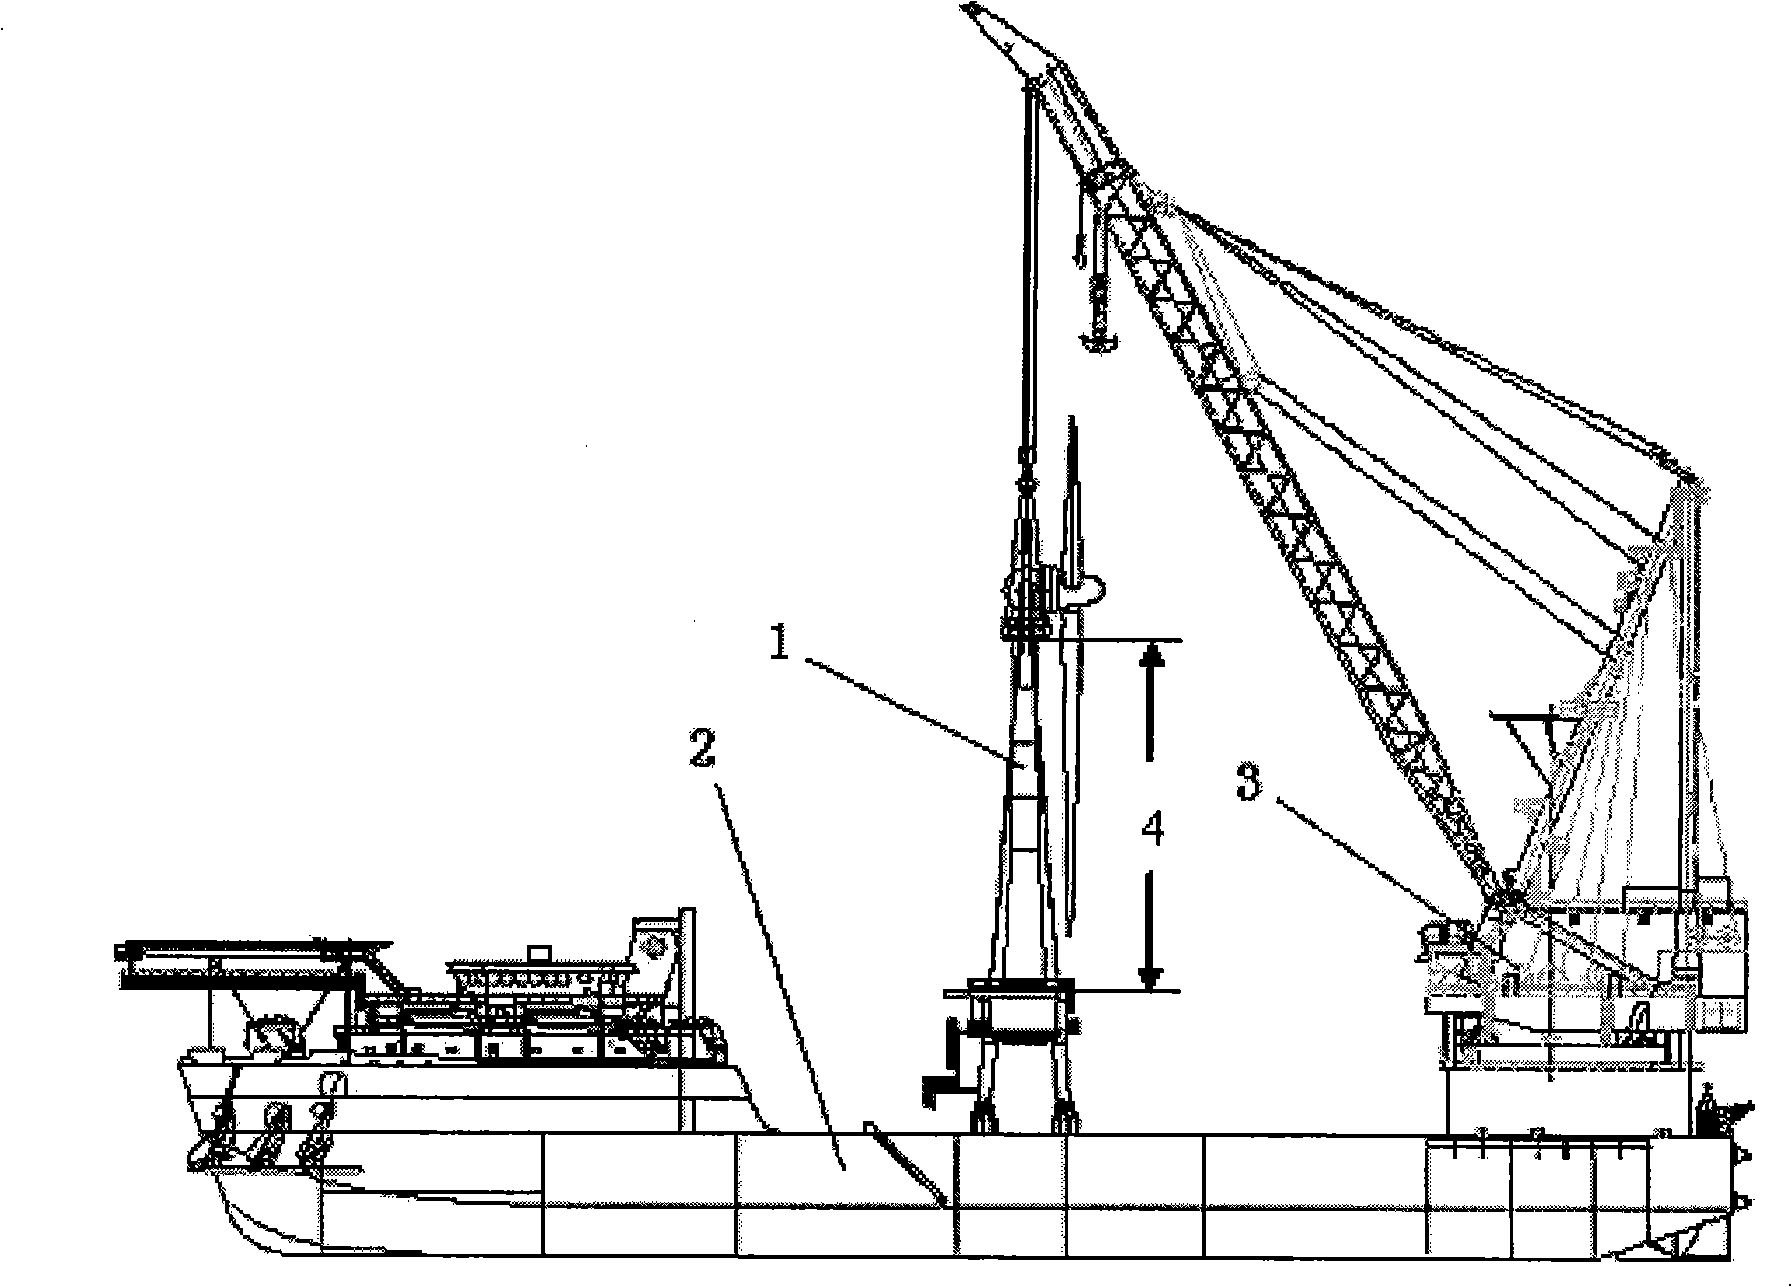 Integral safety carrying method on the sea for wind power generator set